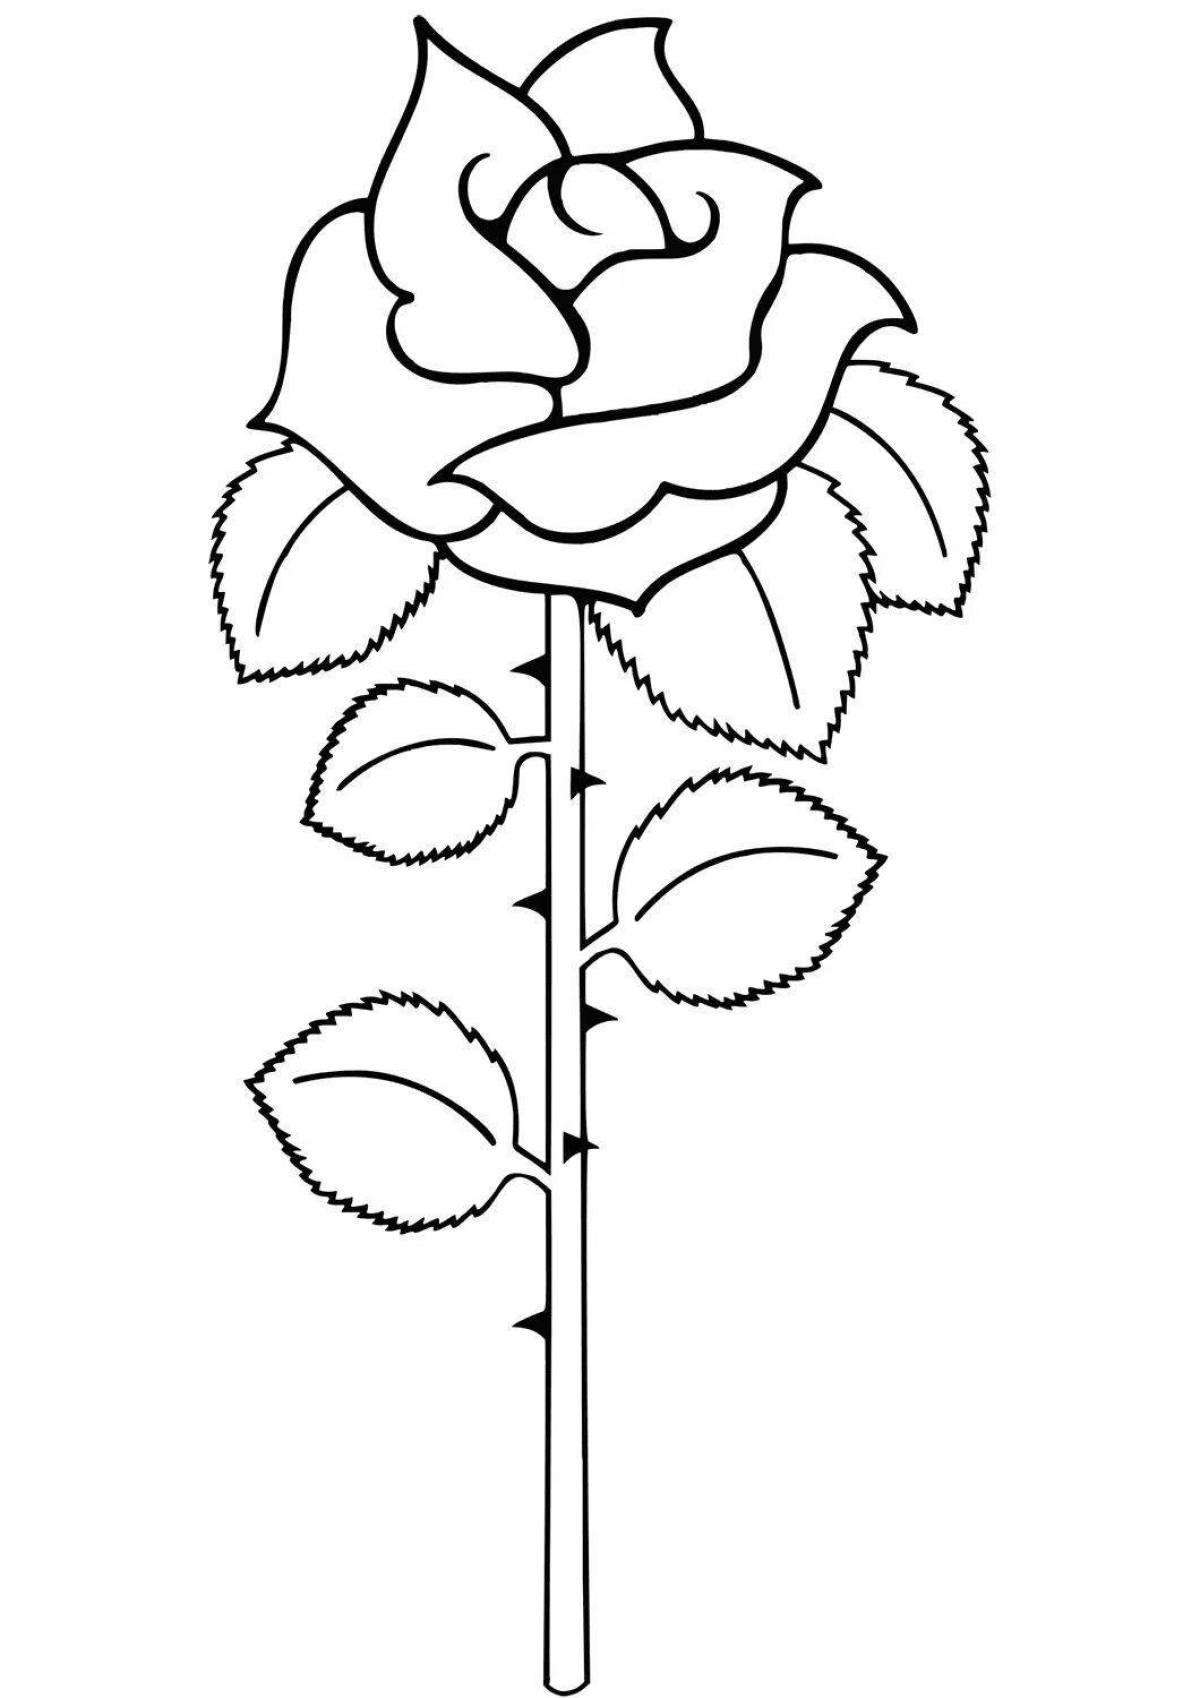 Delicate coloring drawing of a rose